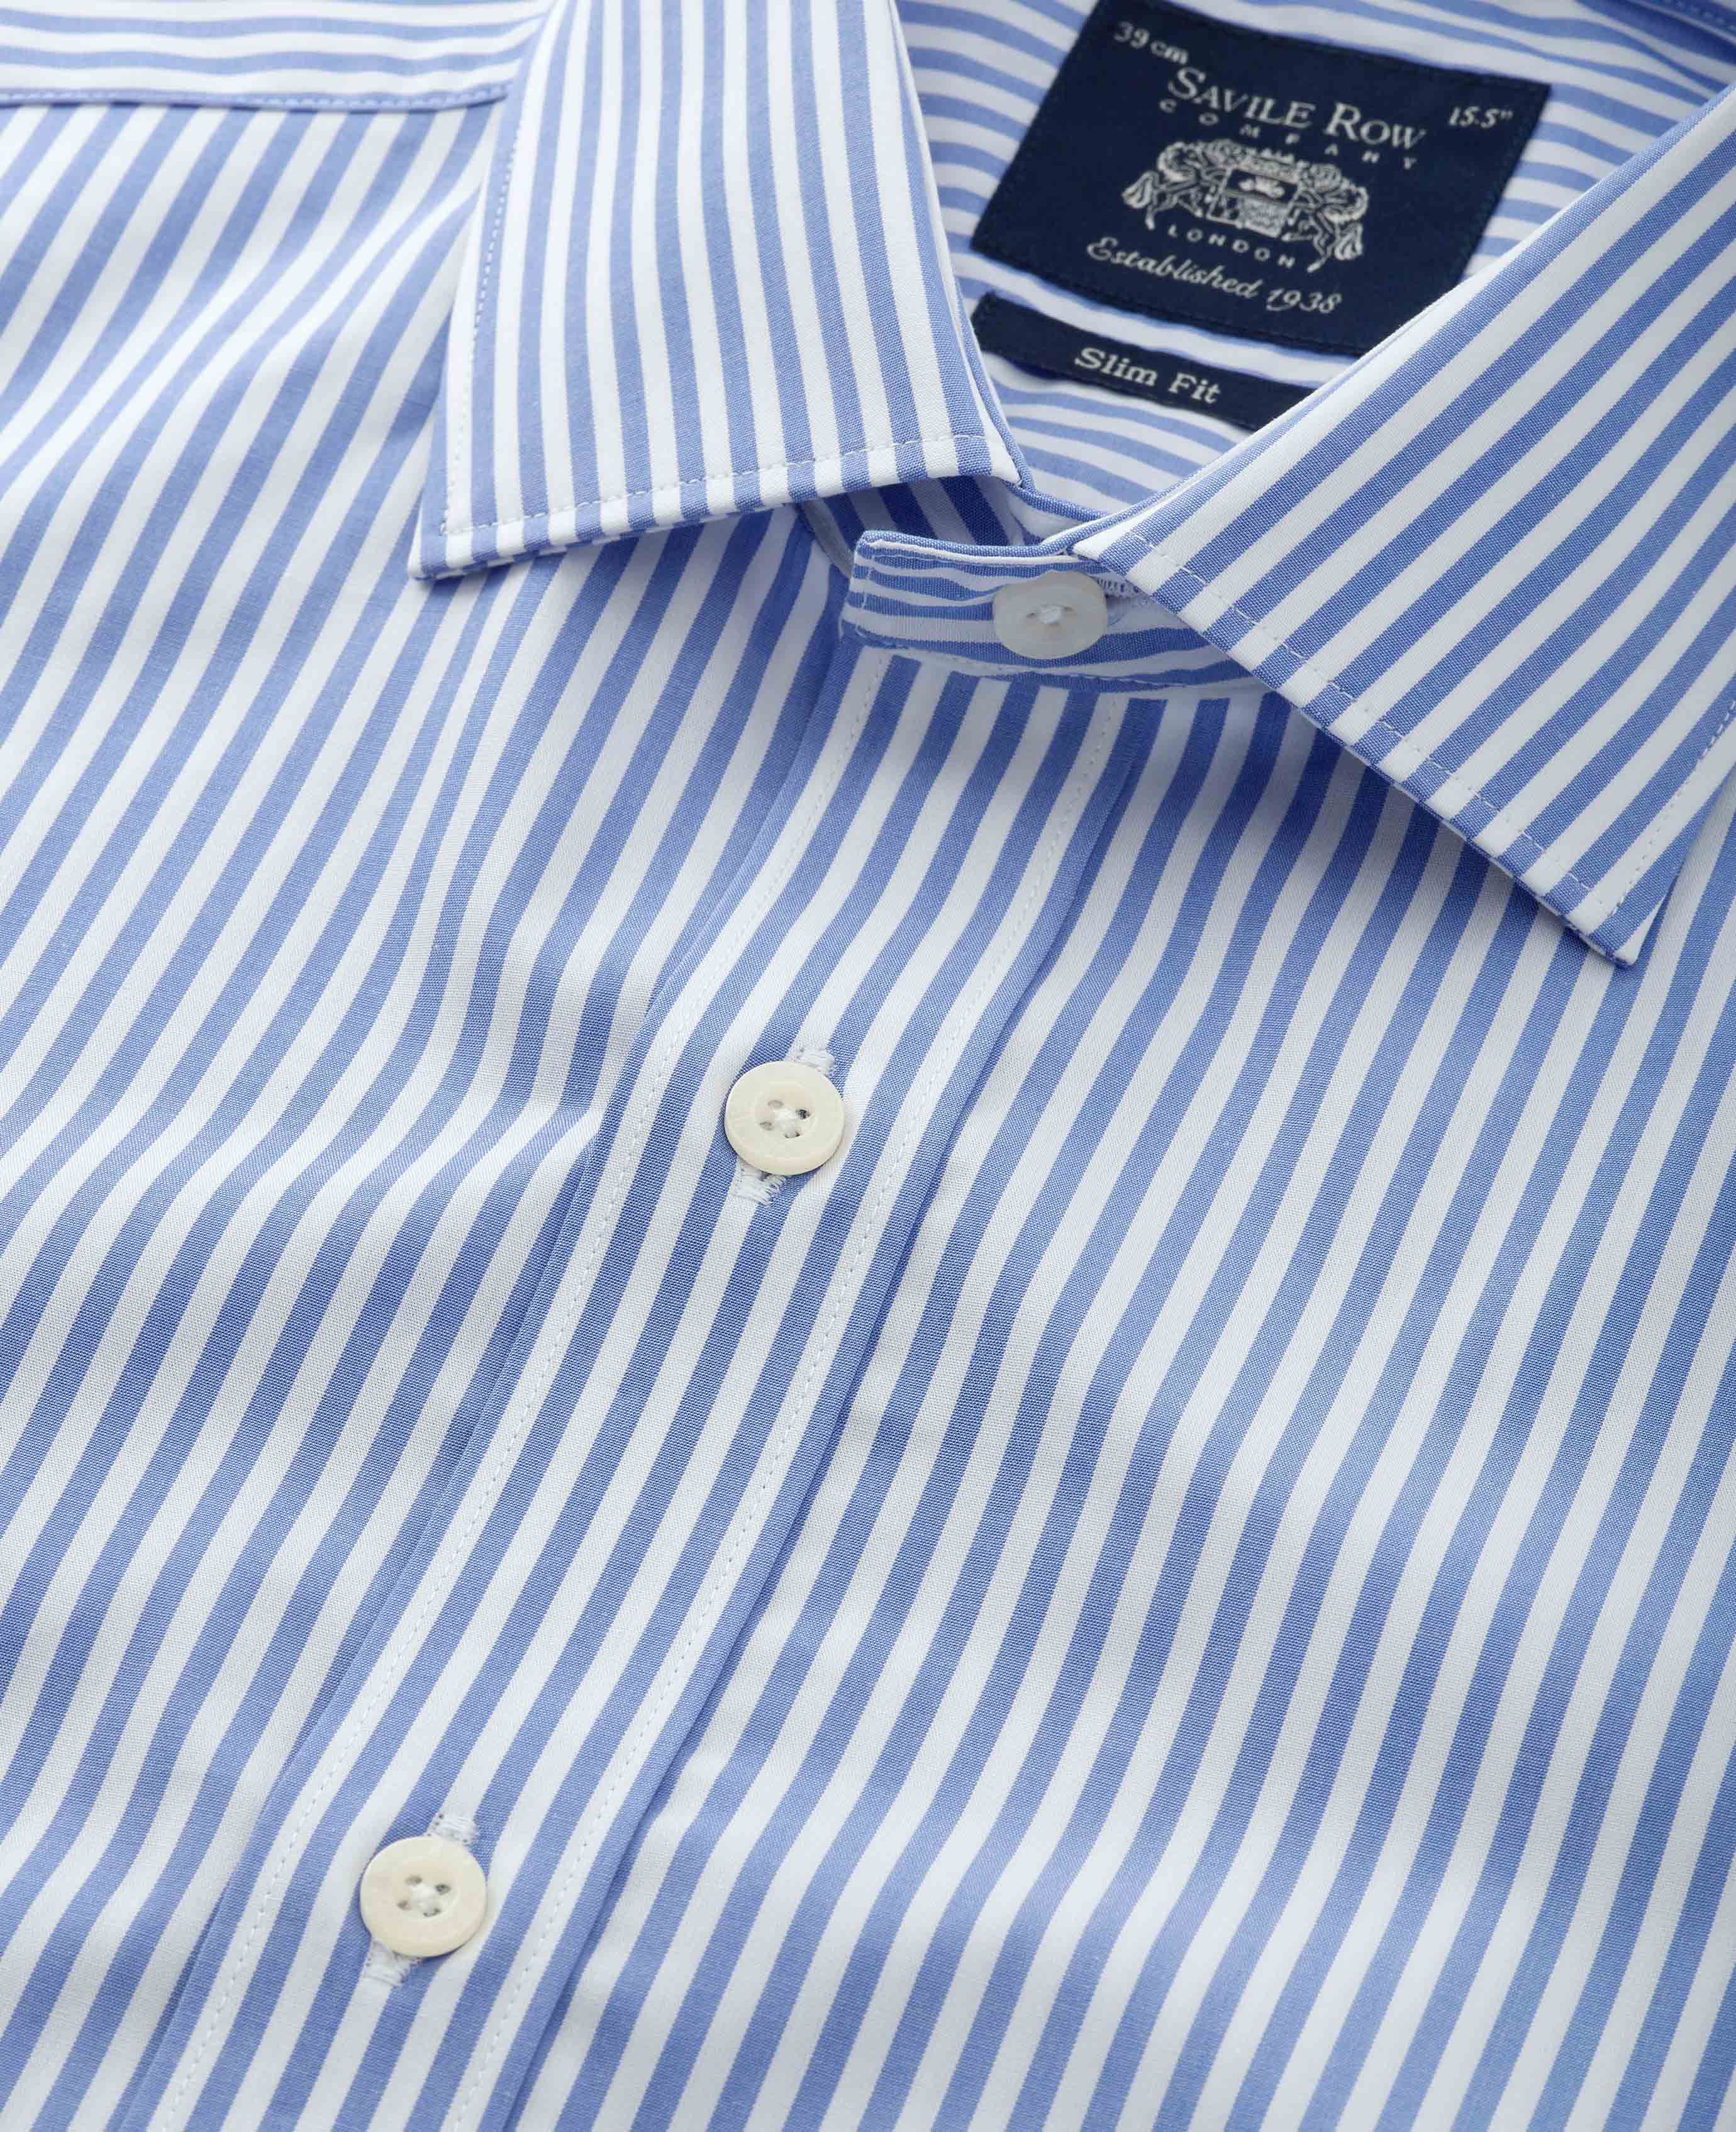 Men's Blue Slim Fit Striped Formal Shirt With Single Cuffs | Savile Row Co